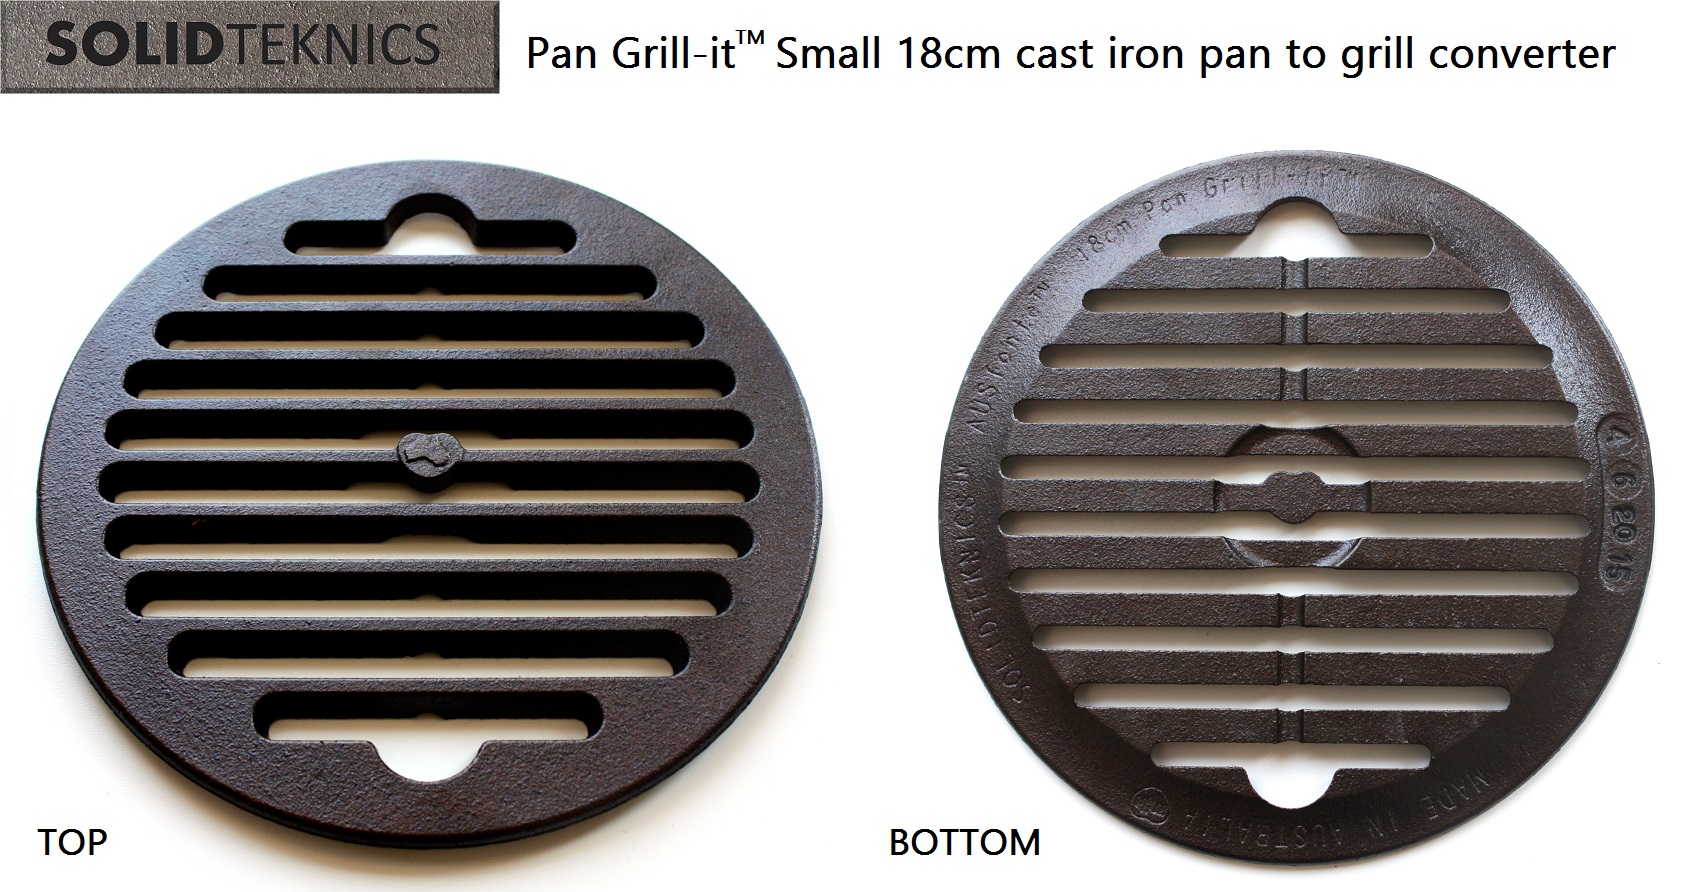 Pan Grill-it cast iron grill insert top and bottom.jpg